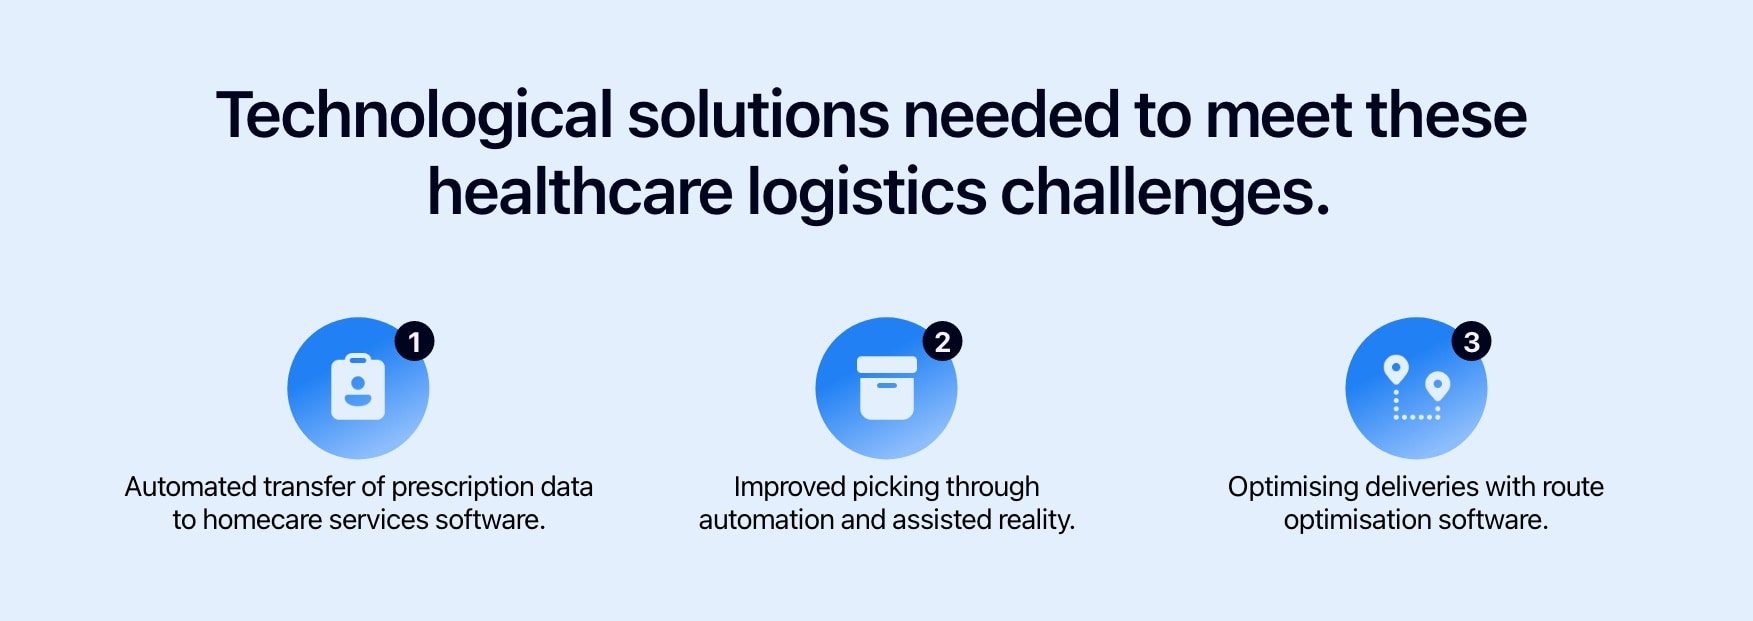 Diagram showing the technological solutions available to meet the challenges of healthcare logistics.